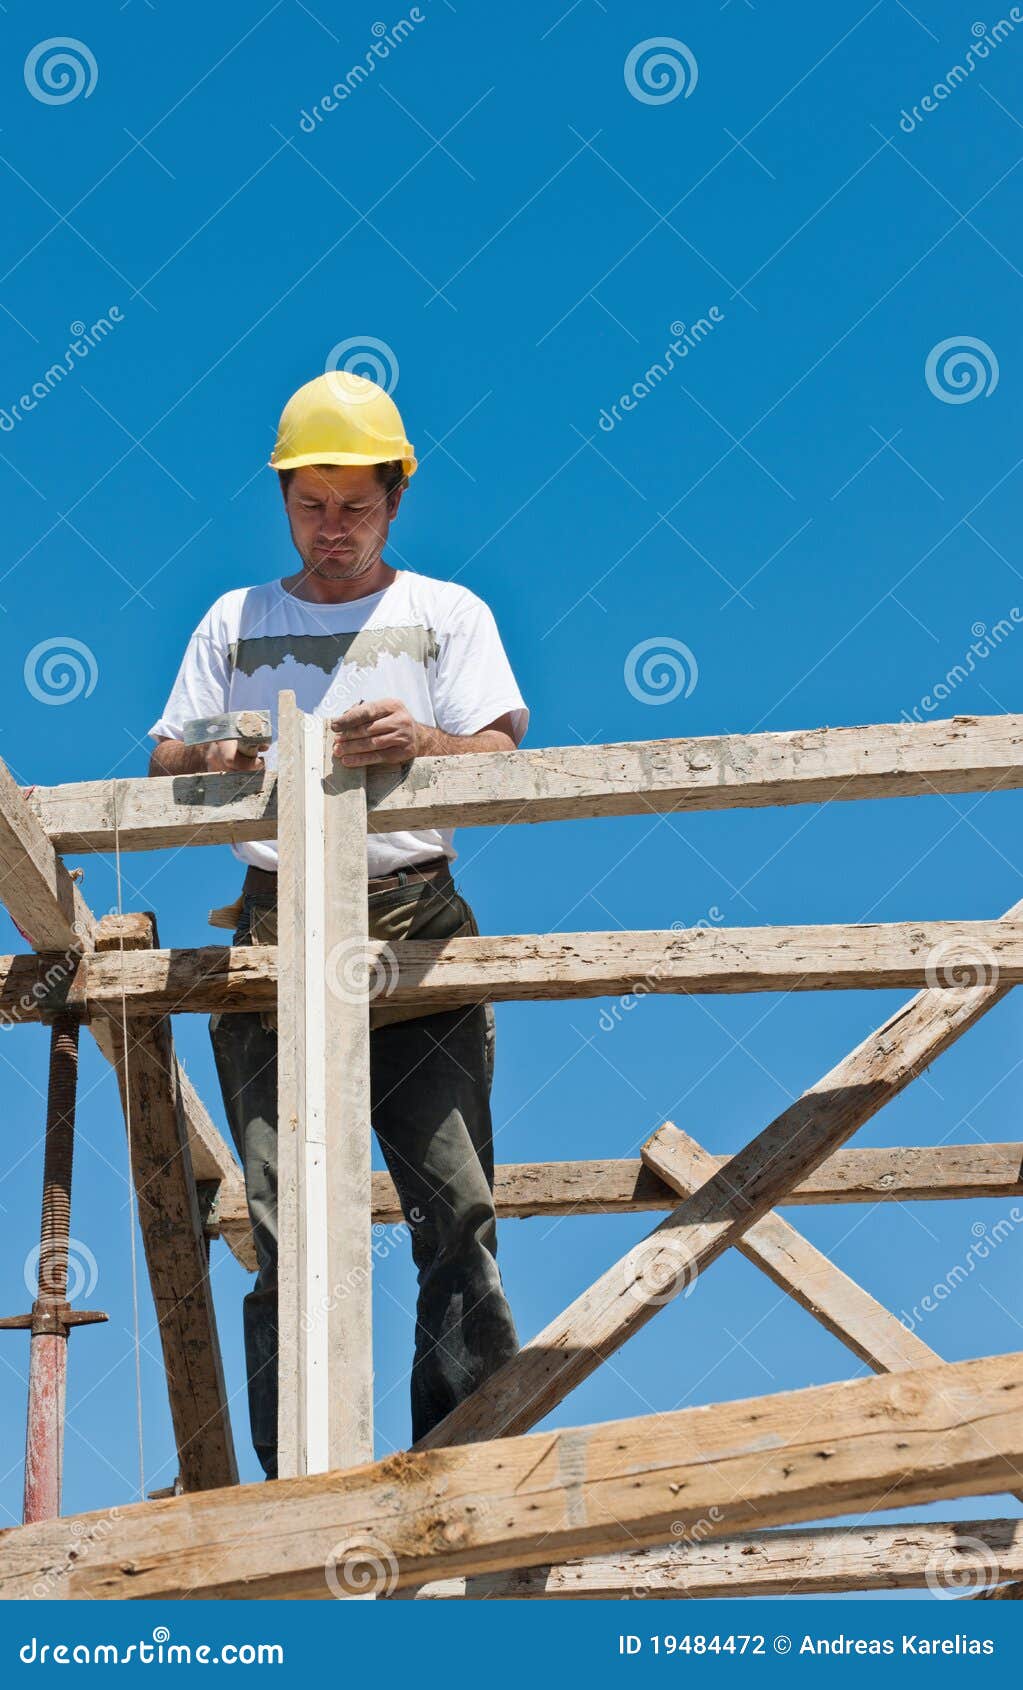 construction worker busy on formwork preparation